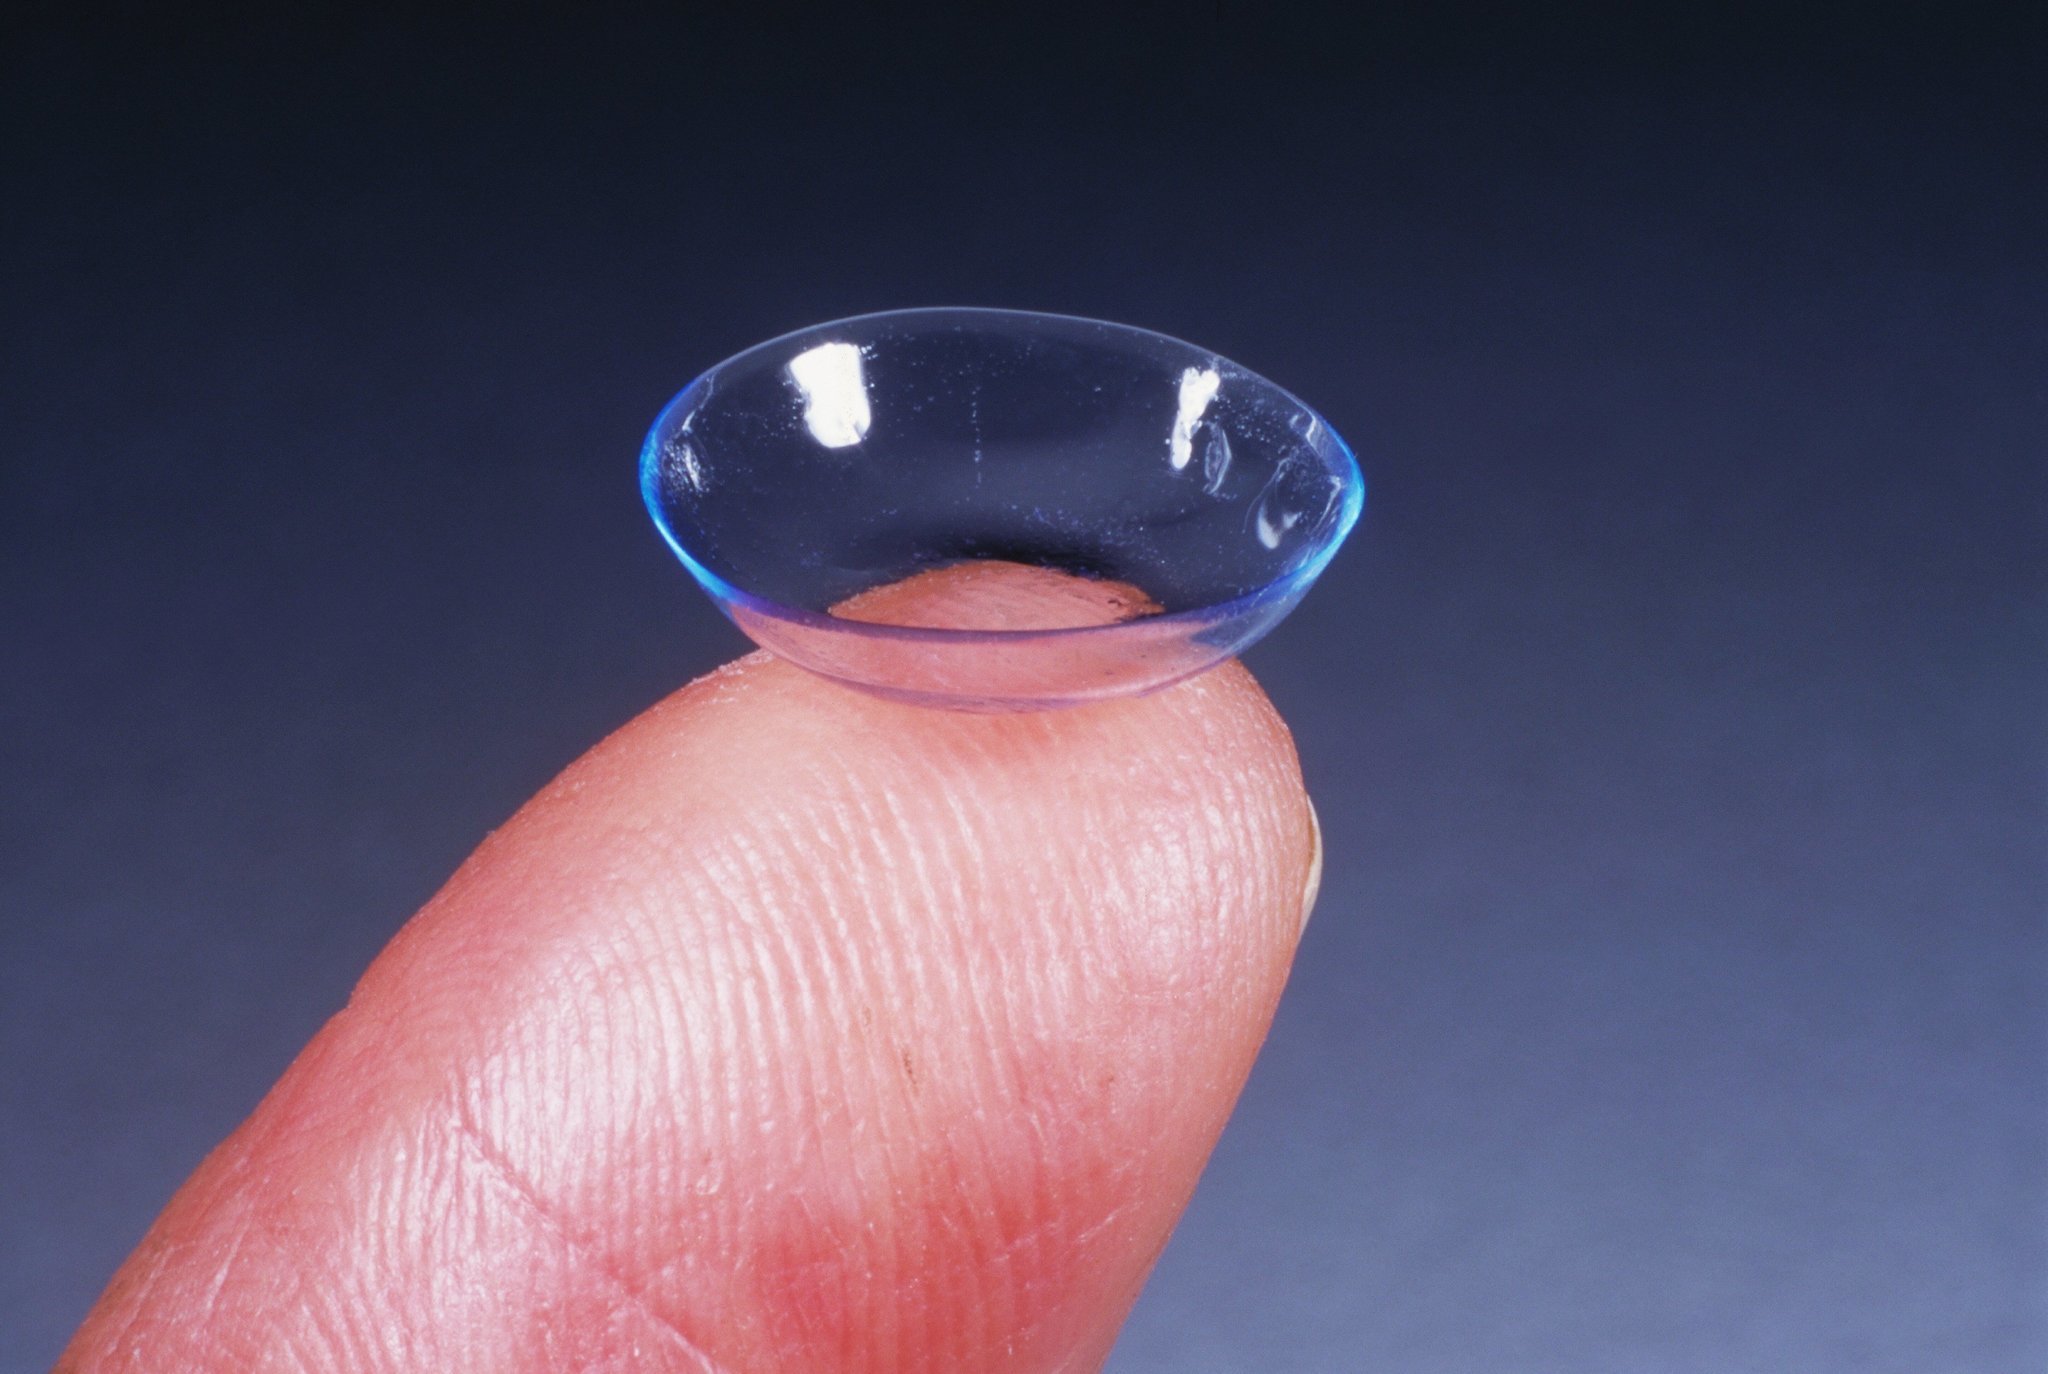 Doctor Finds 27 Contact Lenses Clumped Together In British Womans Eye